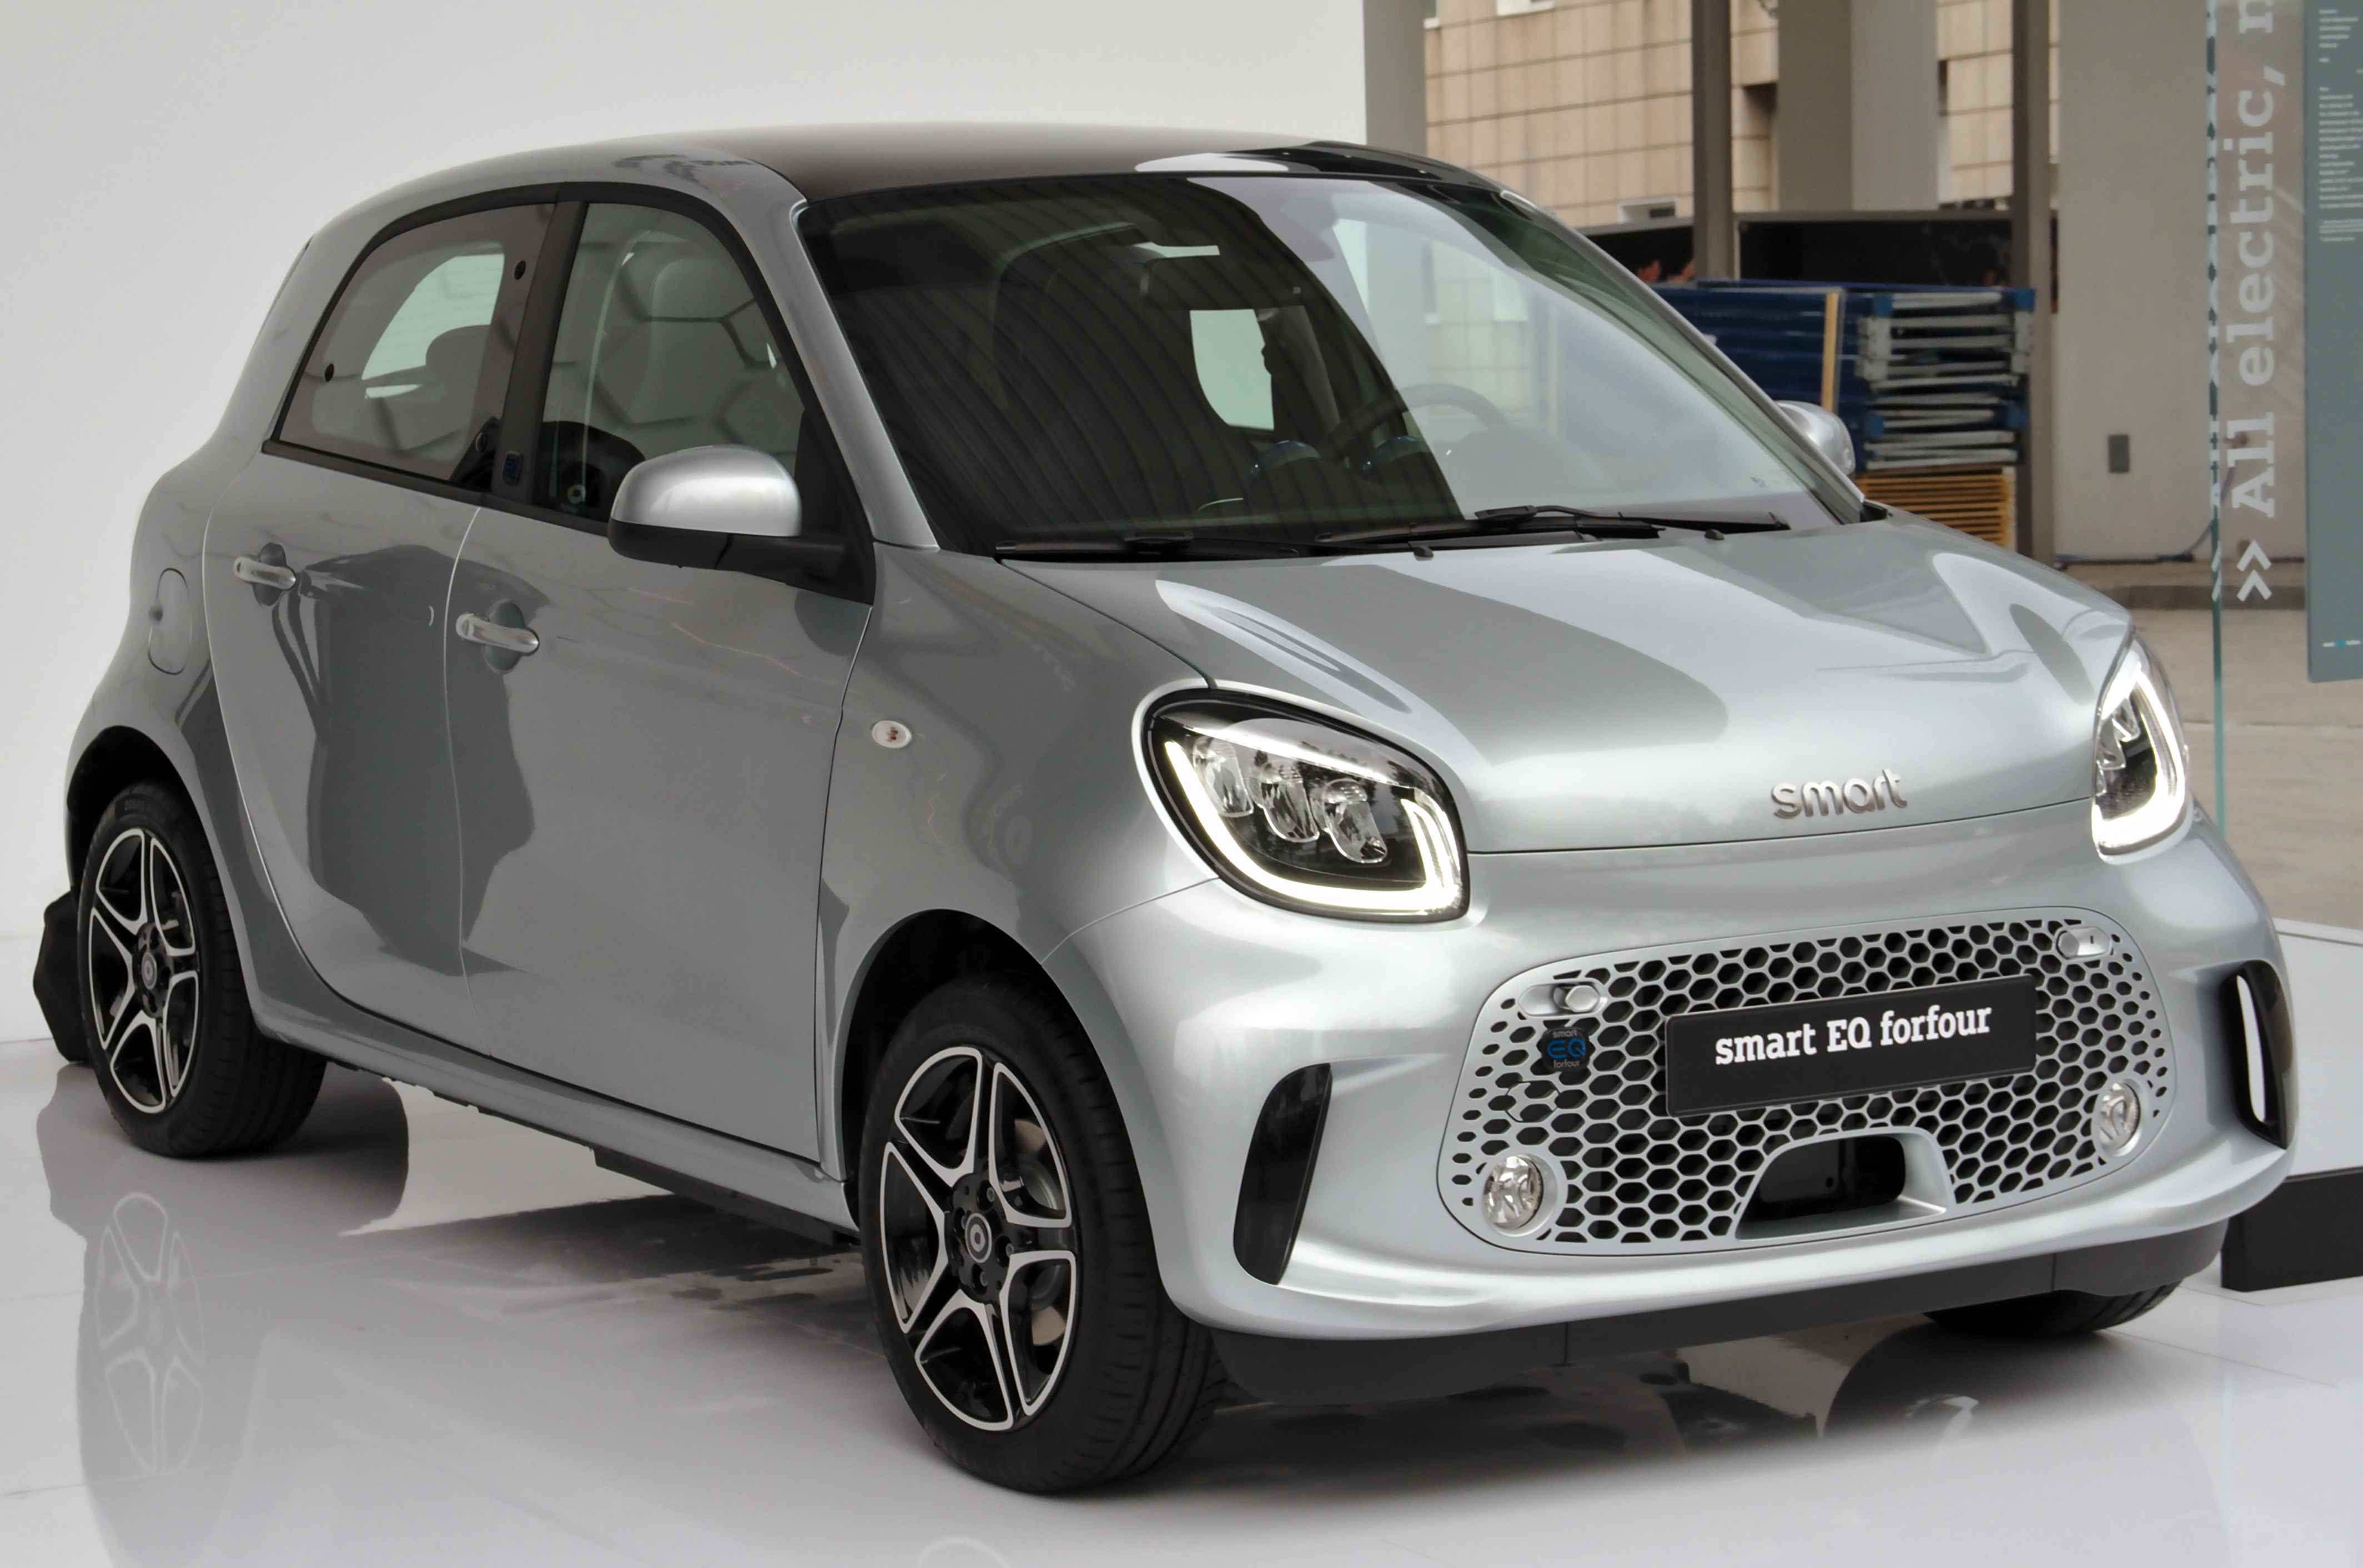 Smart_EQ_forfour_at_IAA_2019_IMG_0799_1.jpg